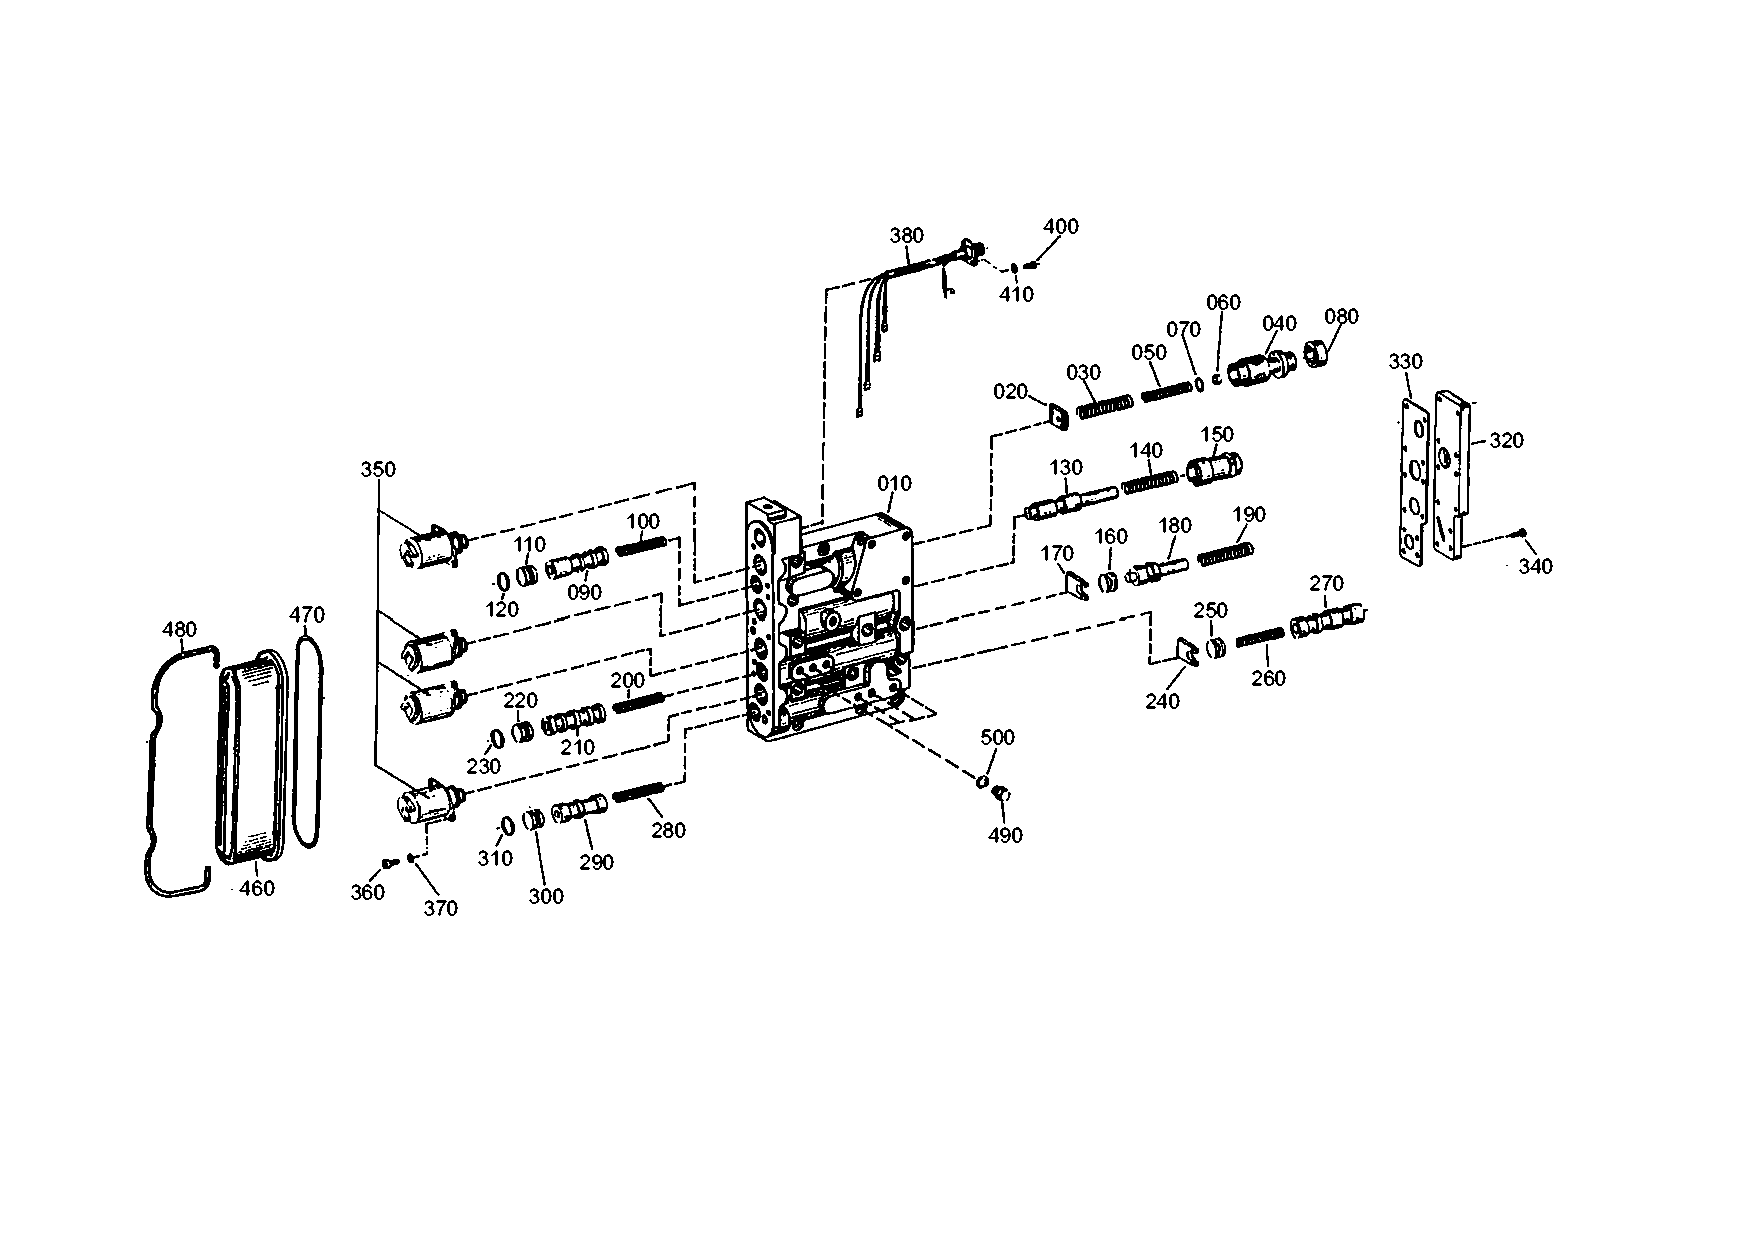 drawing for GROVE 02312339 - SOLENOID VALVE (figure 1)